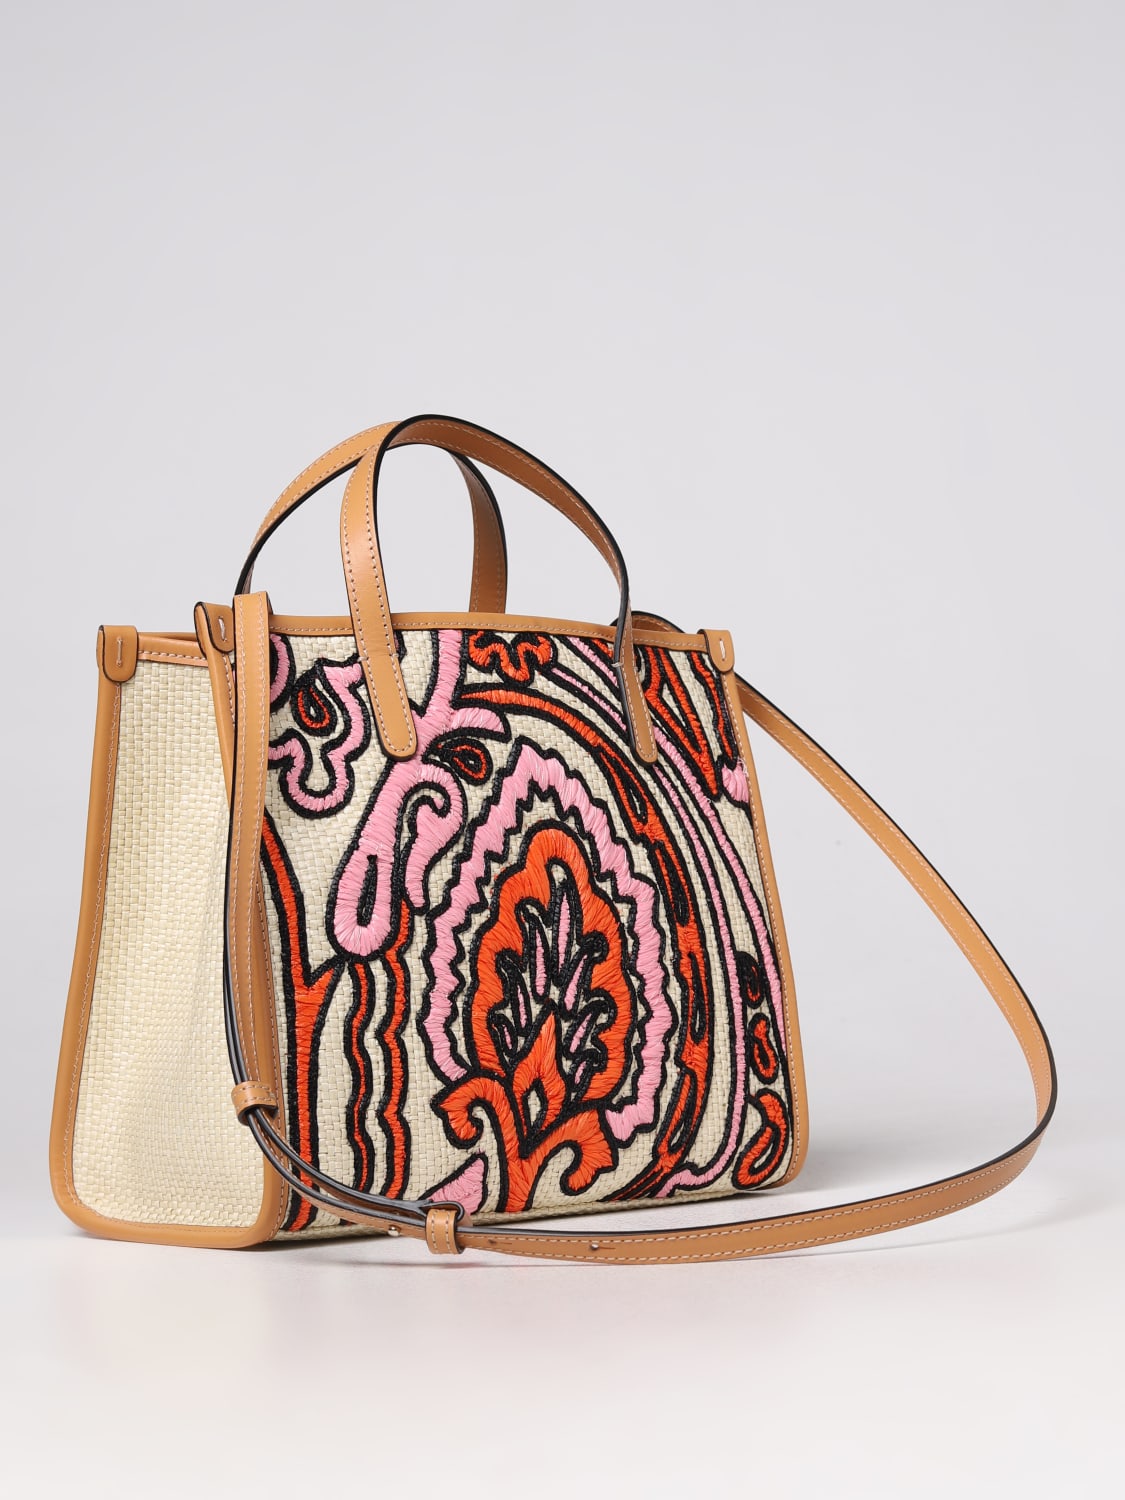 ETRO Globetrotter Pattern Canvas Shopping Tote Bag for Women